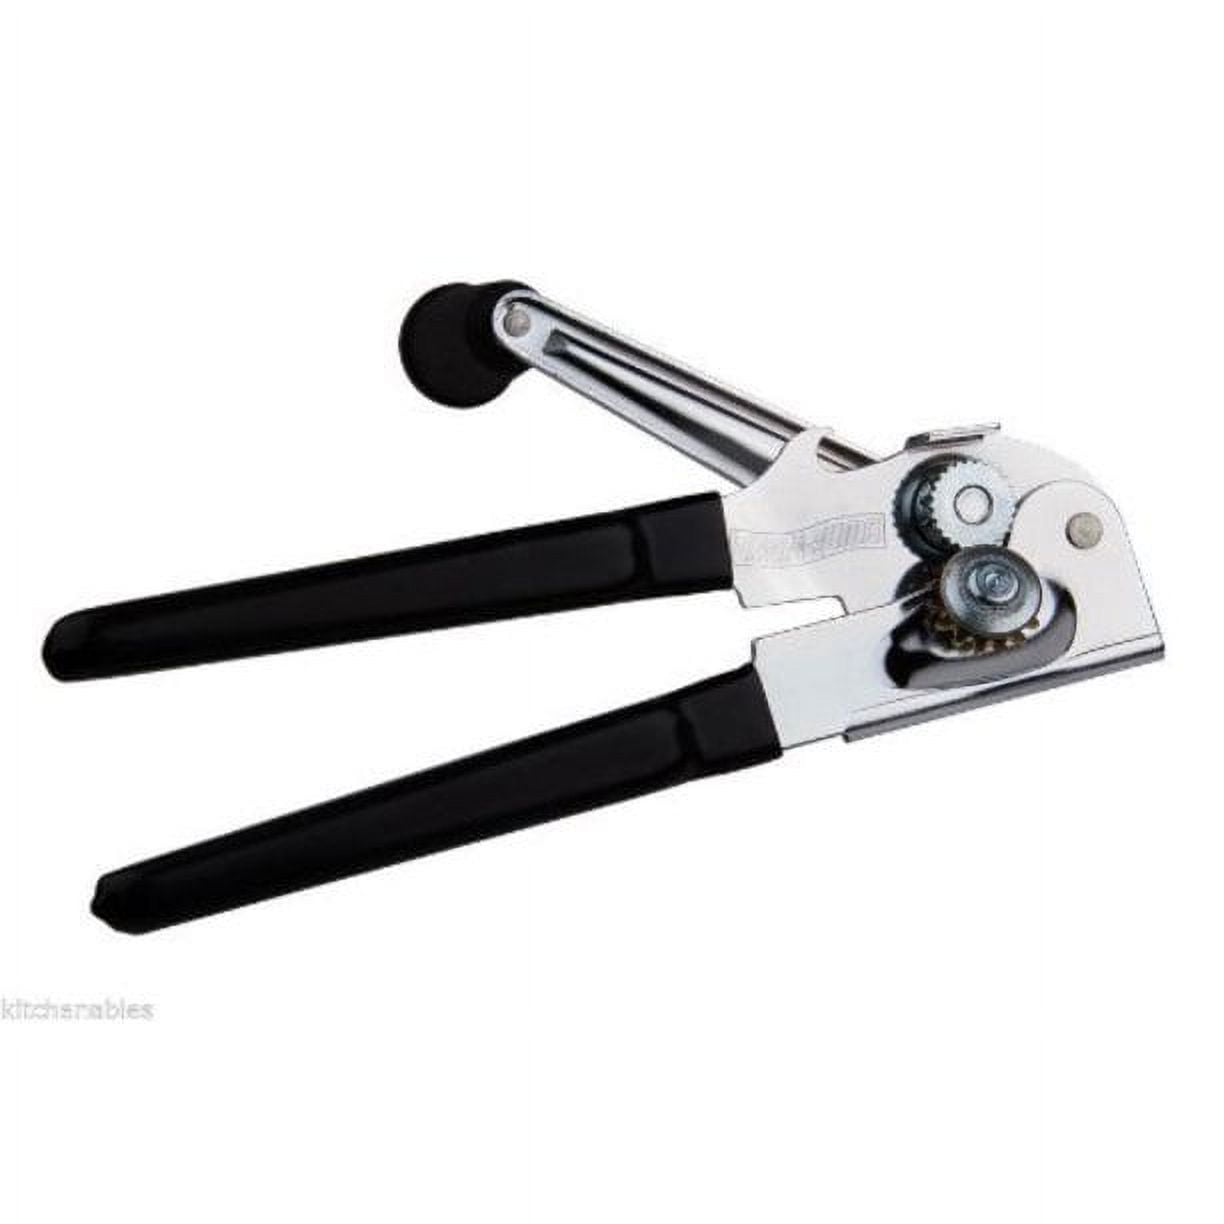 OFFBAIKU 2 pcs Commercial Can Opener Heavy Duty Hand Can Opener Manual  Handheld Can Opener with Easy Crank Handle Smooth Edge for Large Cans.